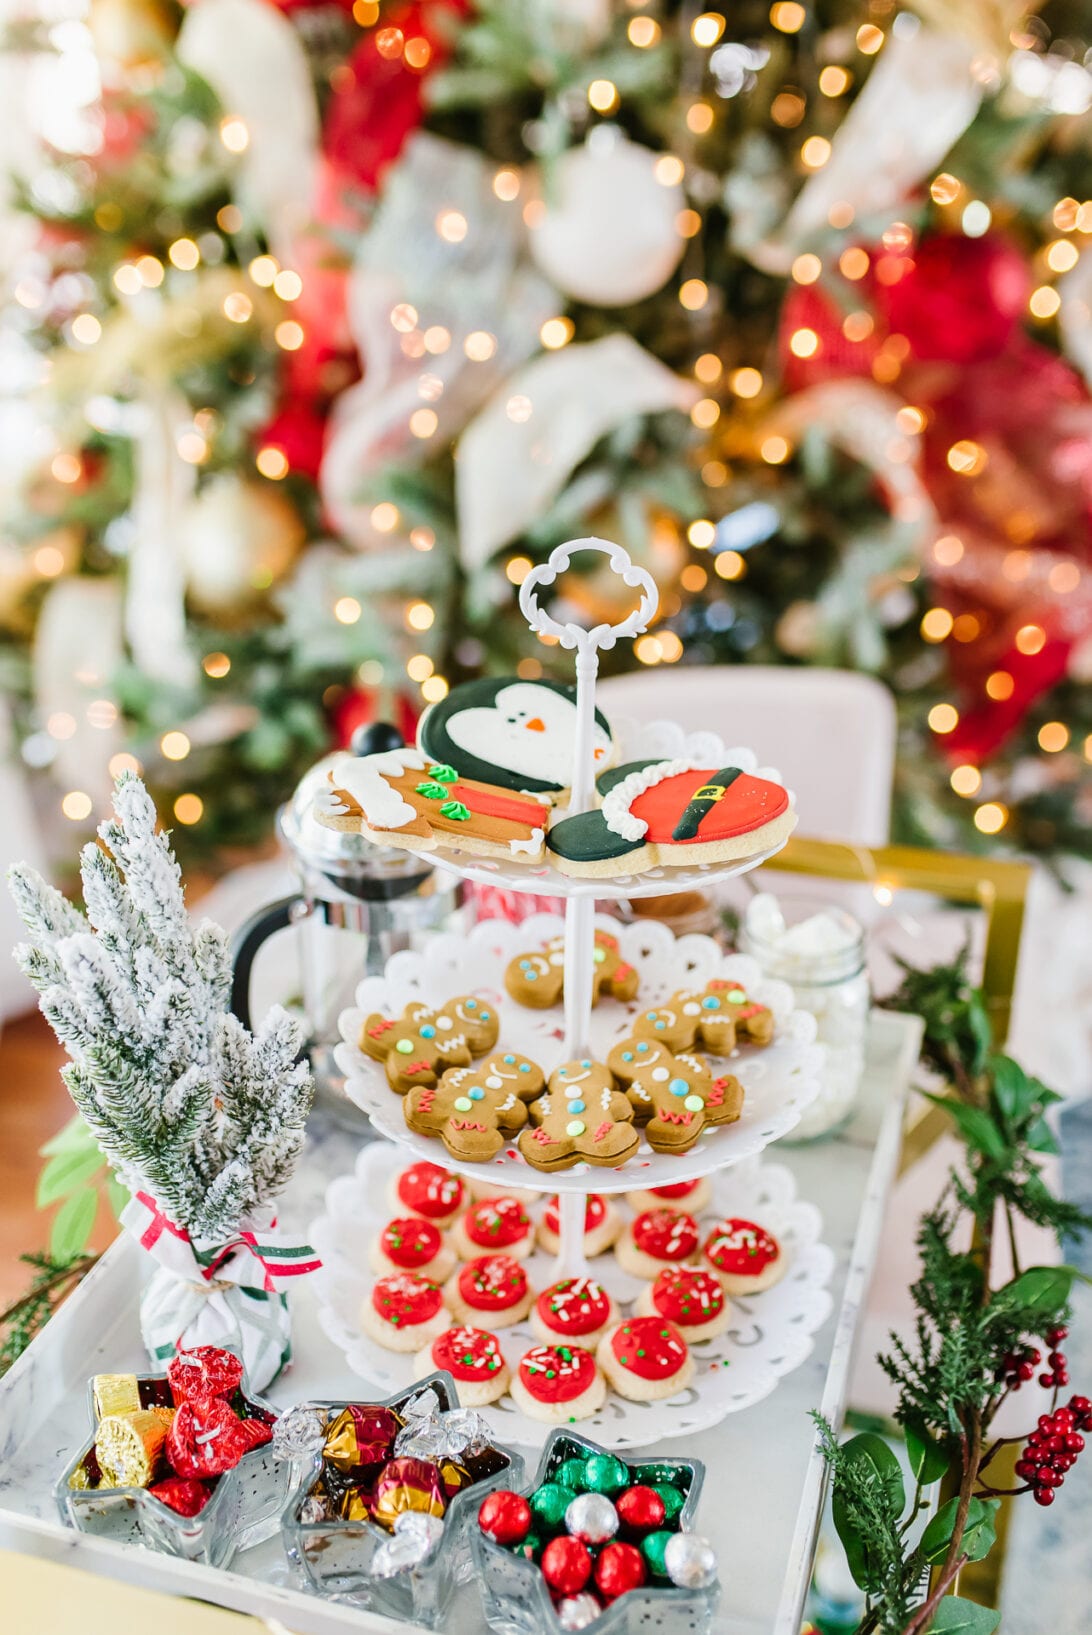 3 Festive Bar Cart Ideas (From Booze To Hot Cocoa) - The Mom Edit